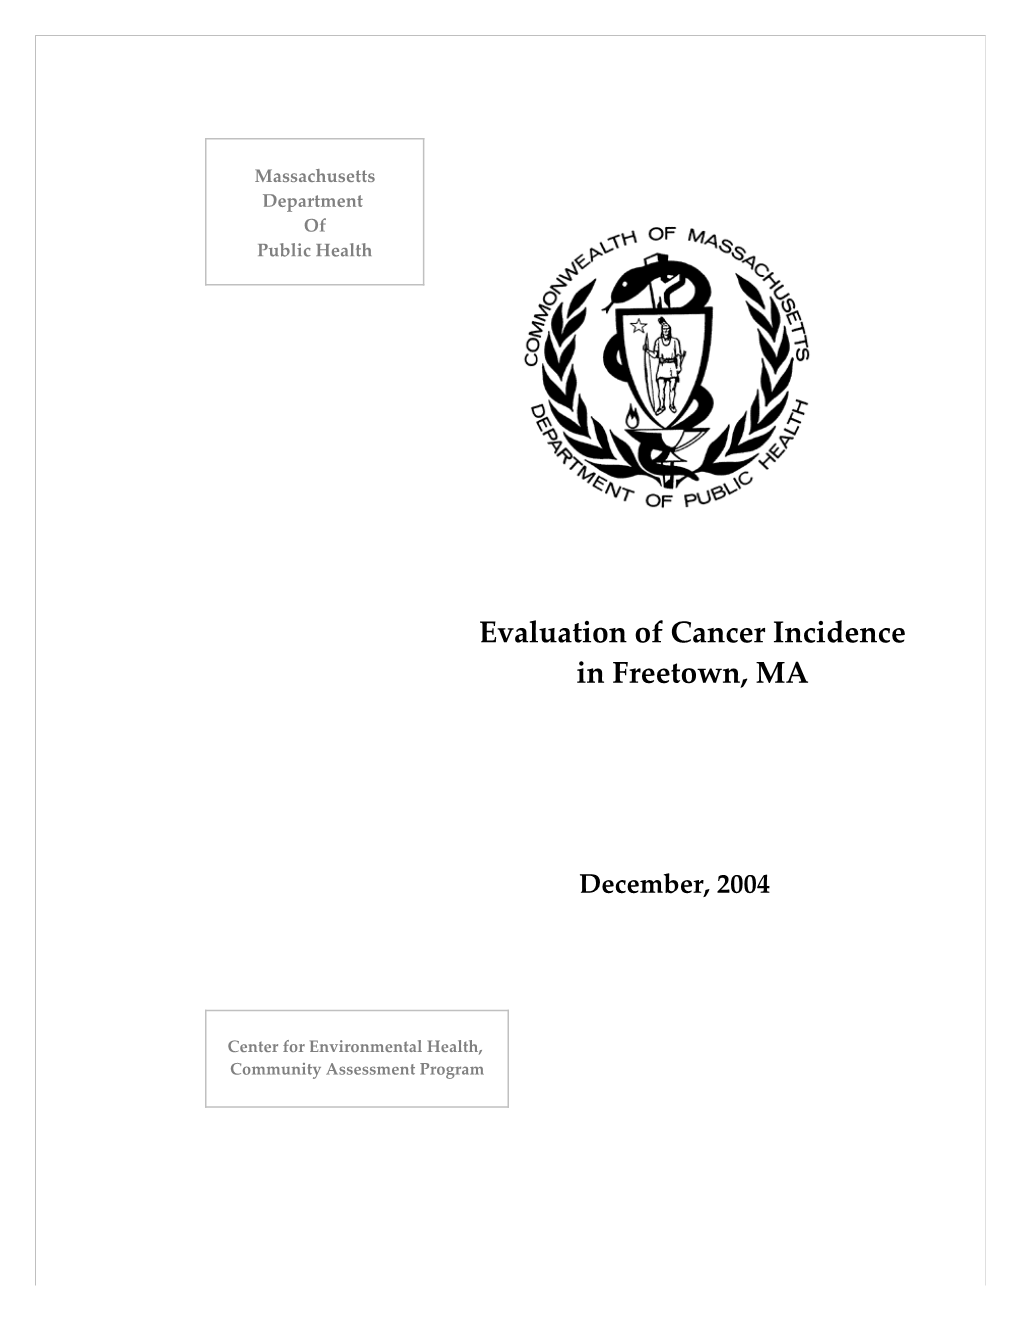 Evaluation of Cancer Incidence in Freetown, MA